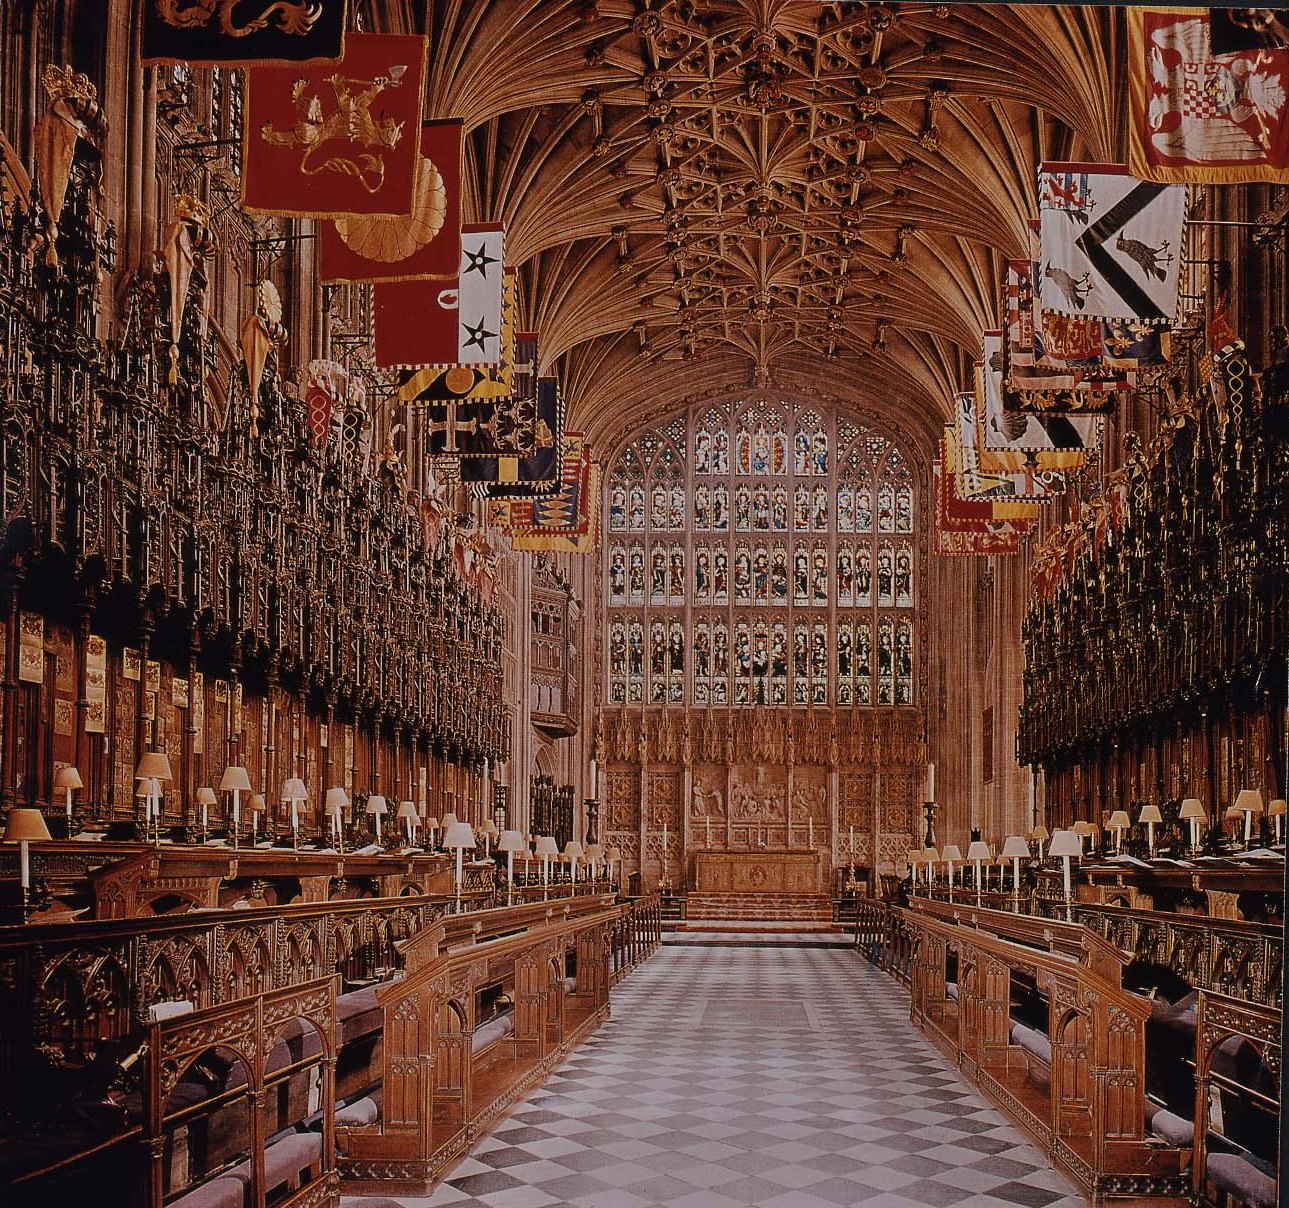 Banners in the Quire, with that of Hirohito 3rd on the left.